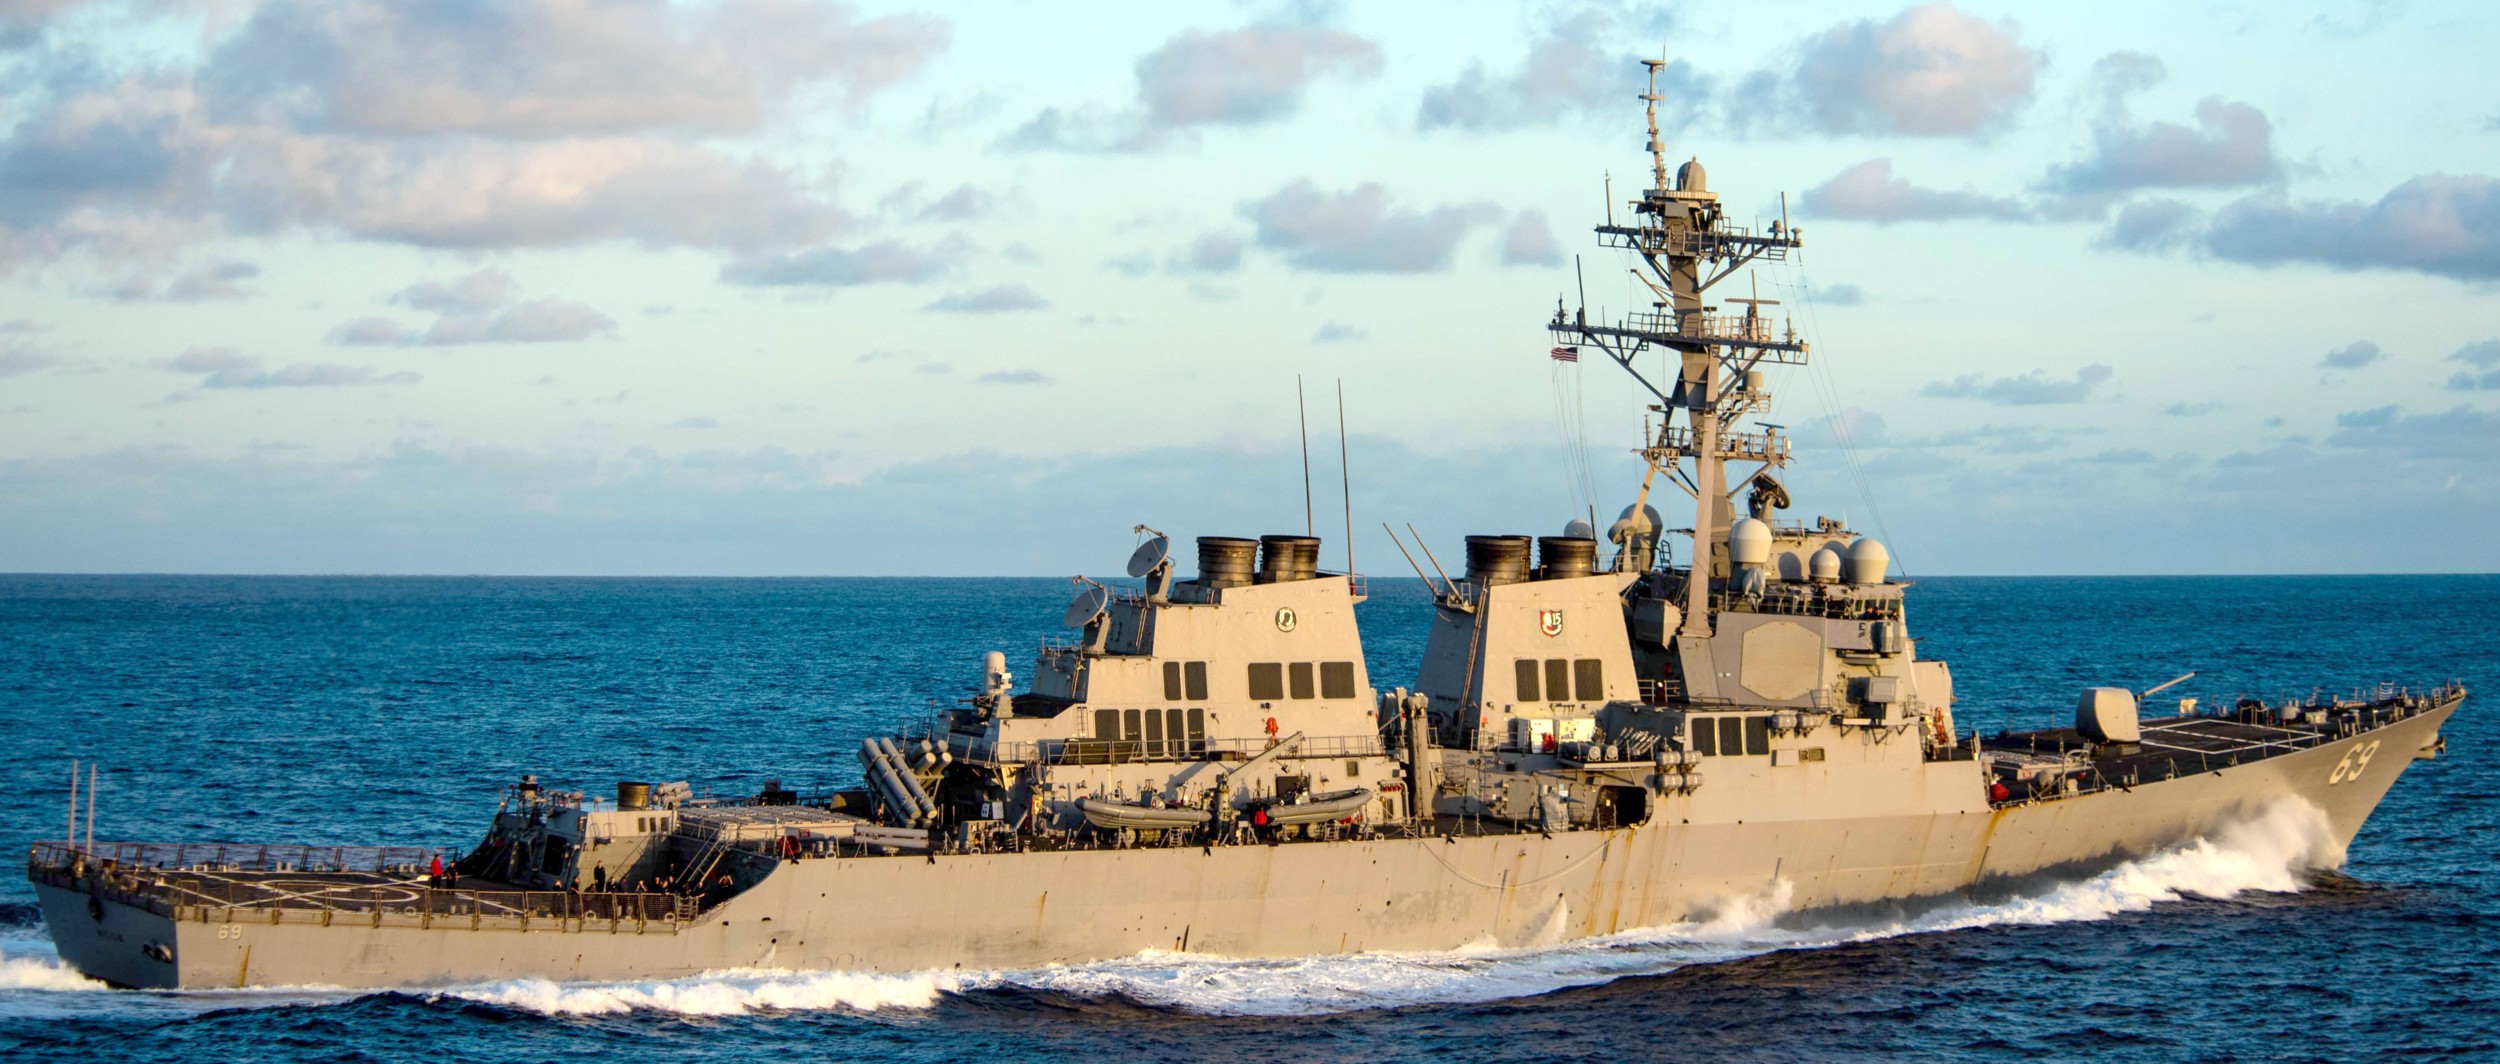 ddg-69 uss milius guided missile destroyer arleigh burke class aegis bmd 11